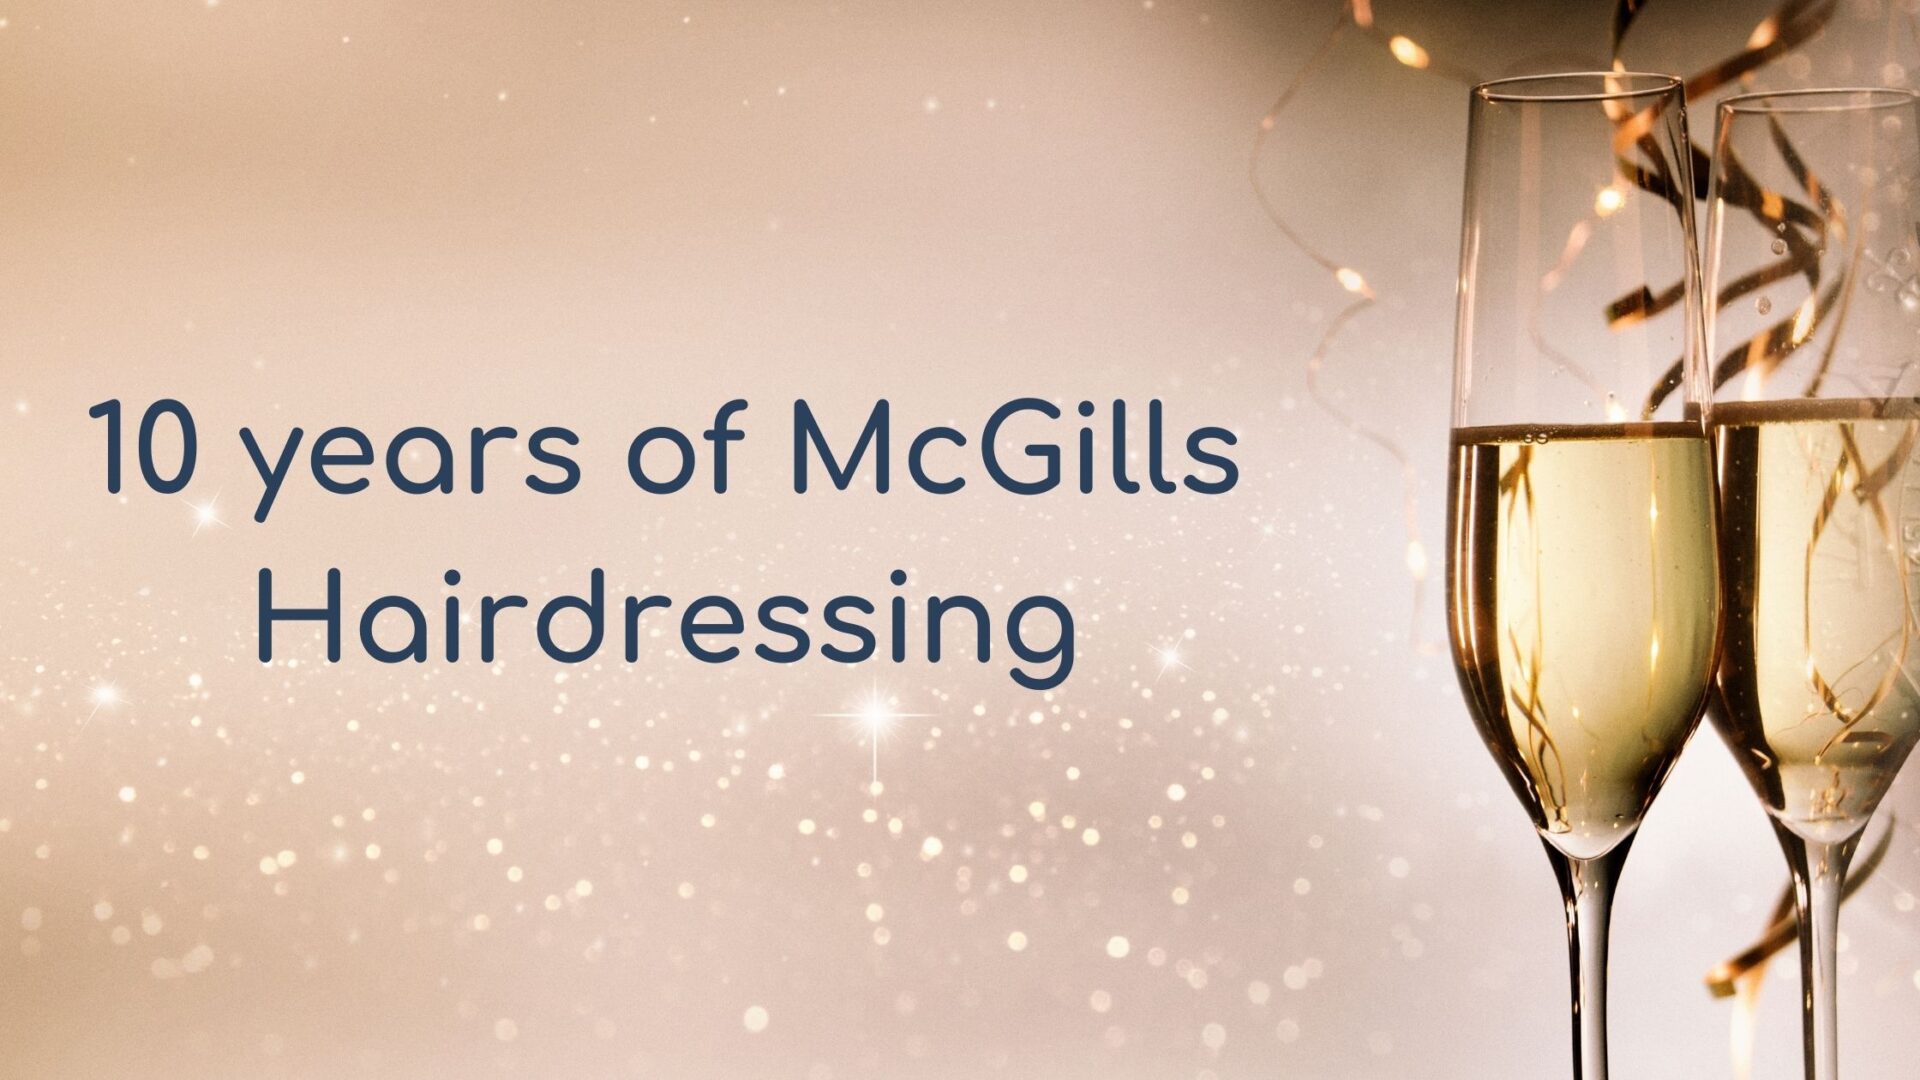 10 years of McGills Hairdressing